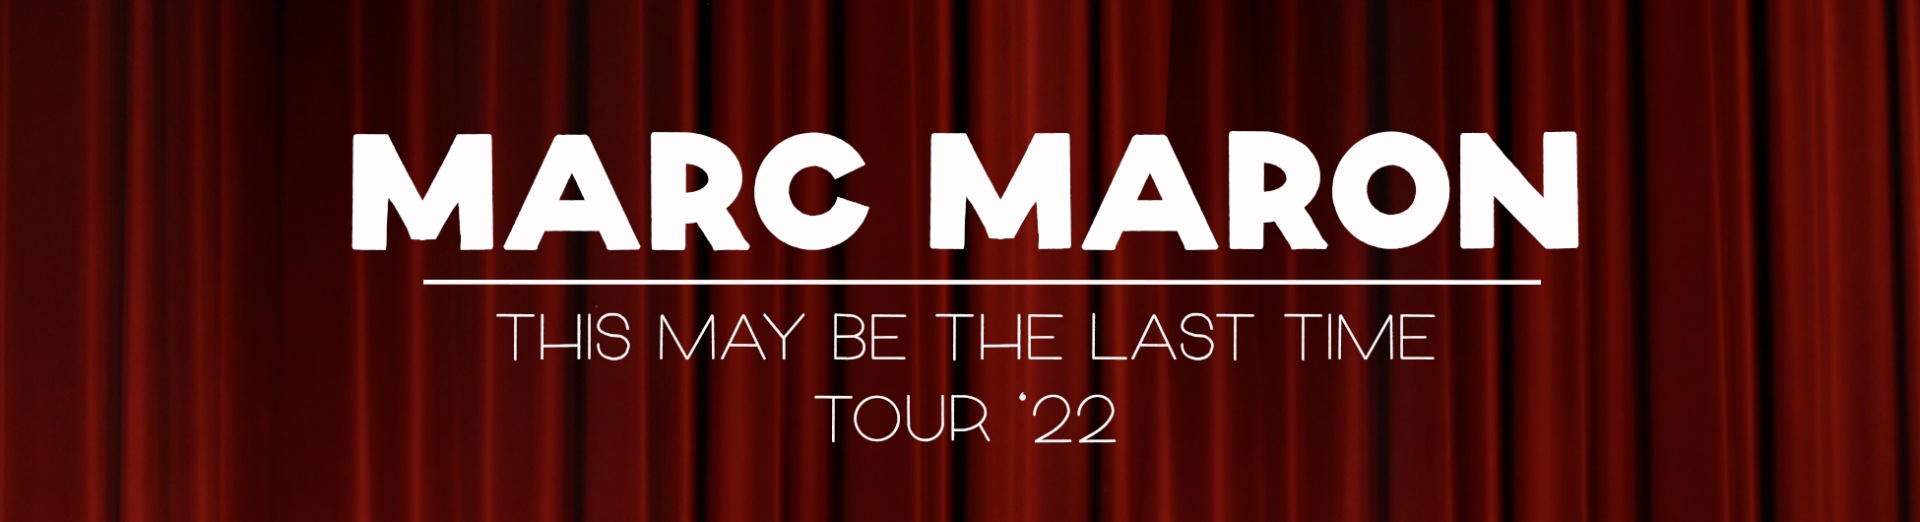 Against a background of curtains are the words &quot;Marc Maron This May Be The Last Time Tour &#039;22&quot;